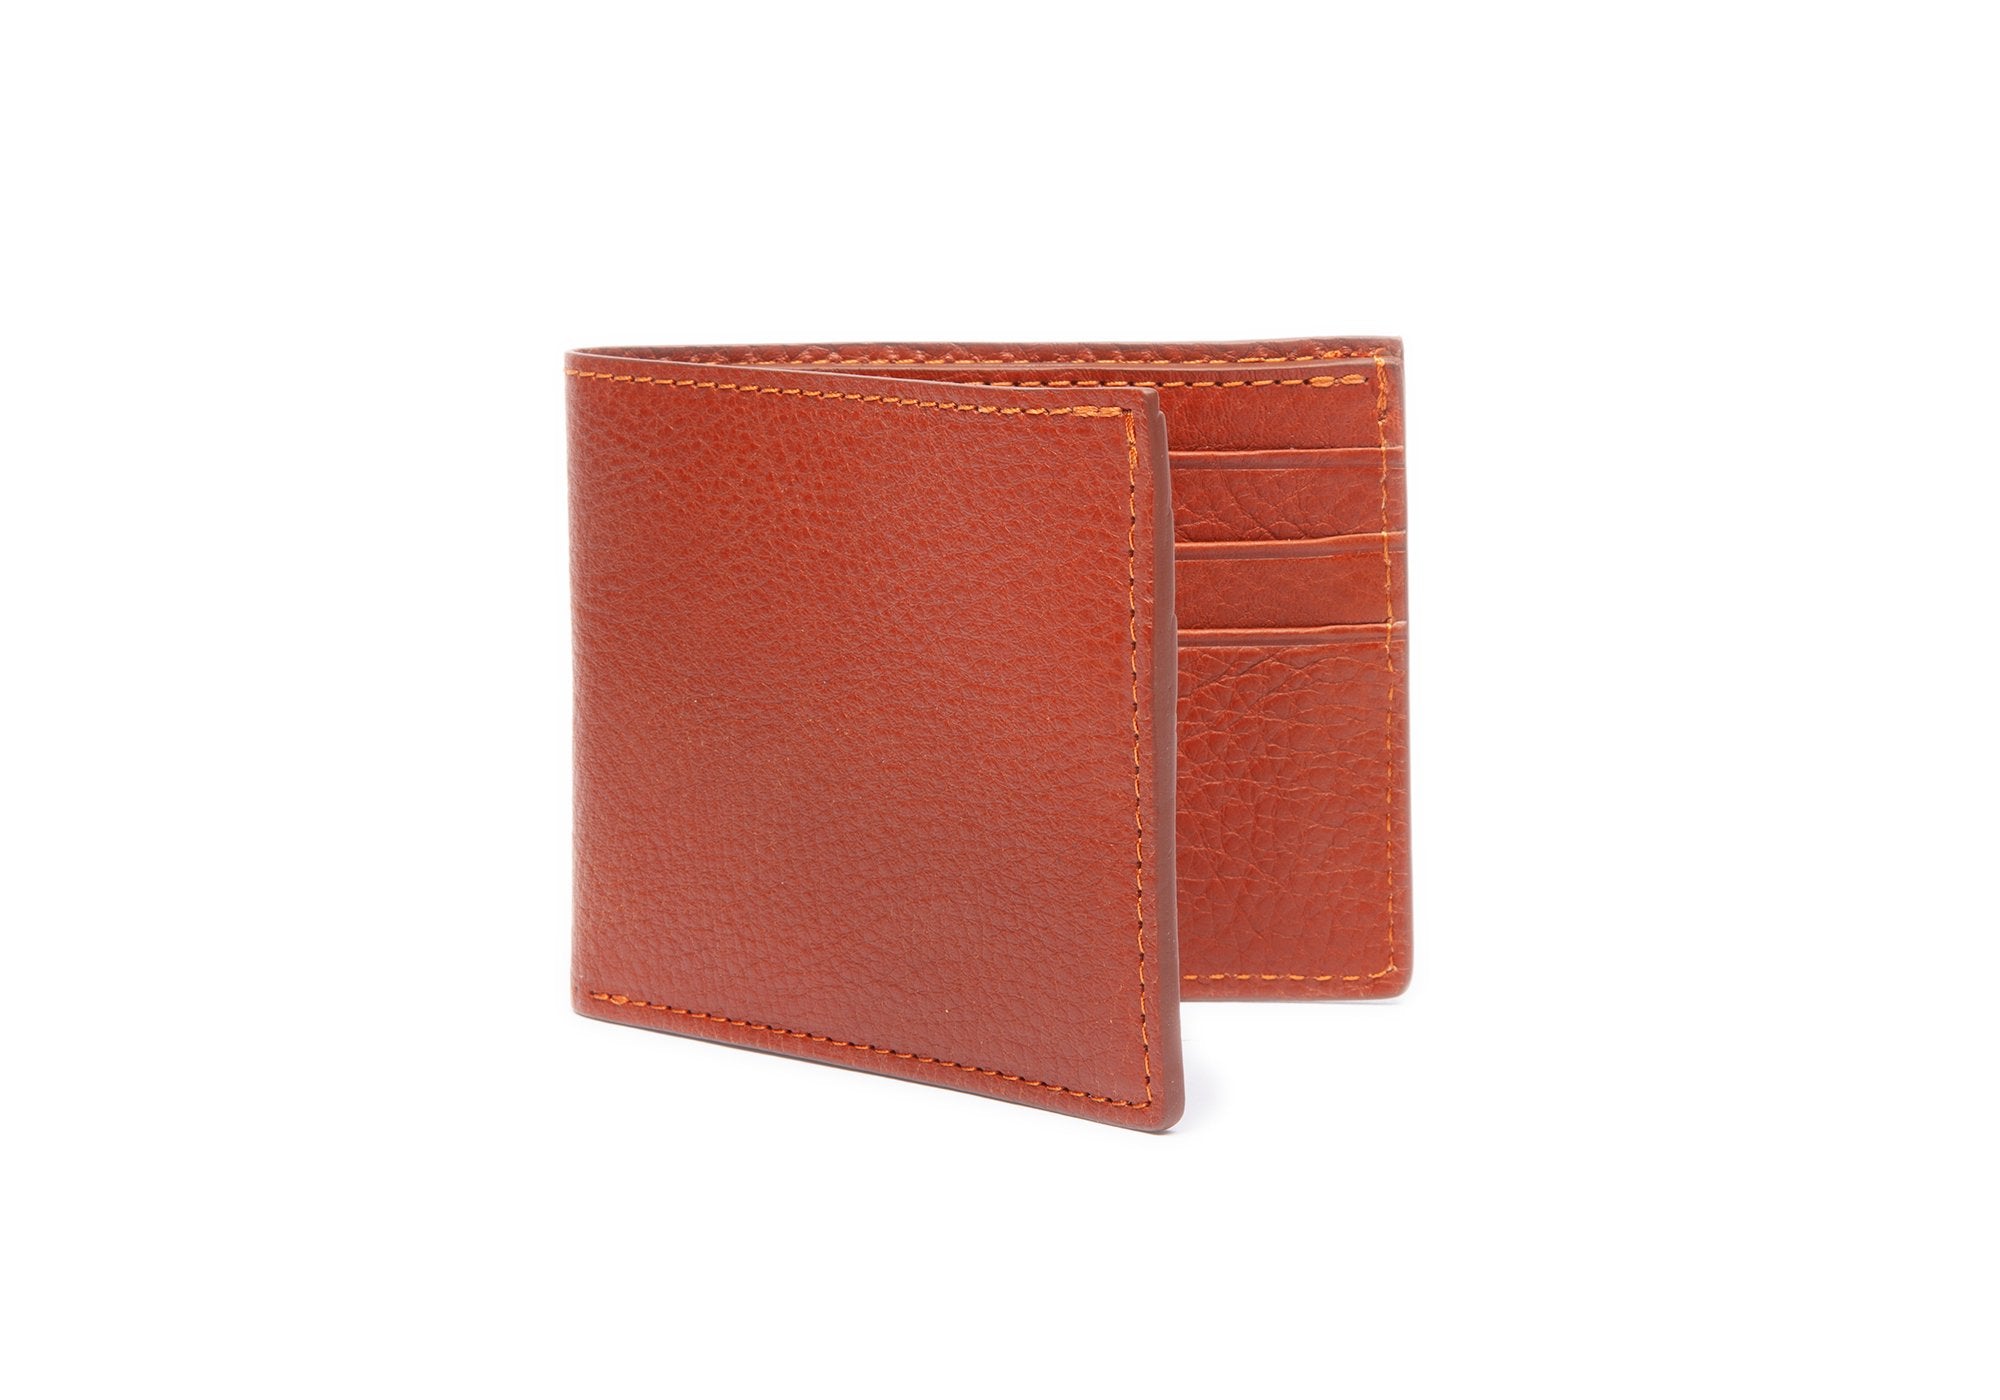 Red Leather Long Wallet